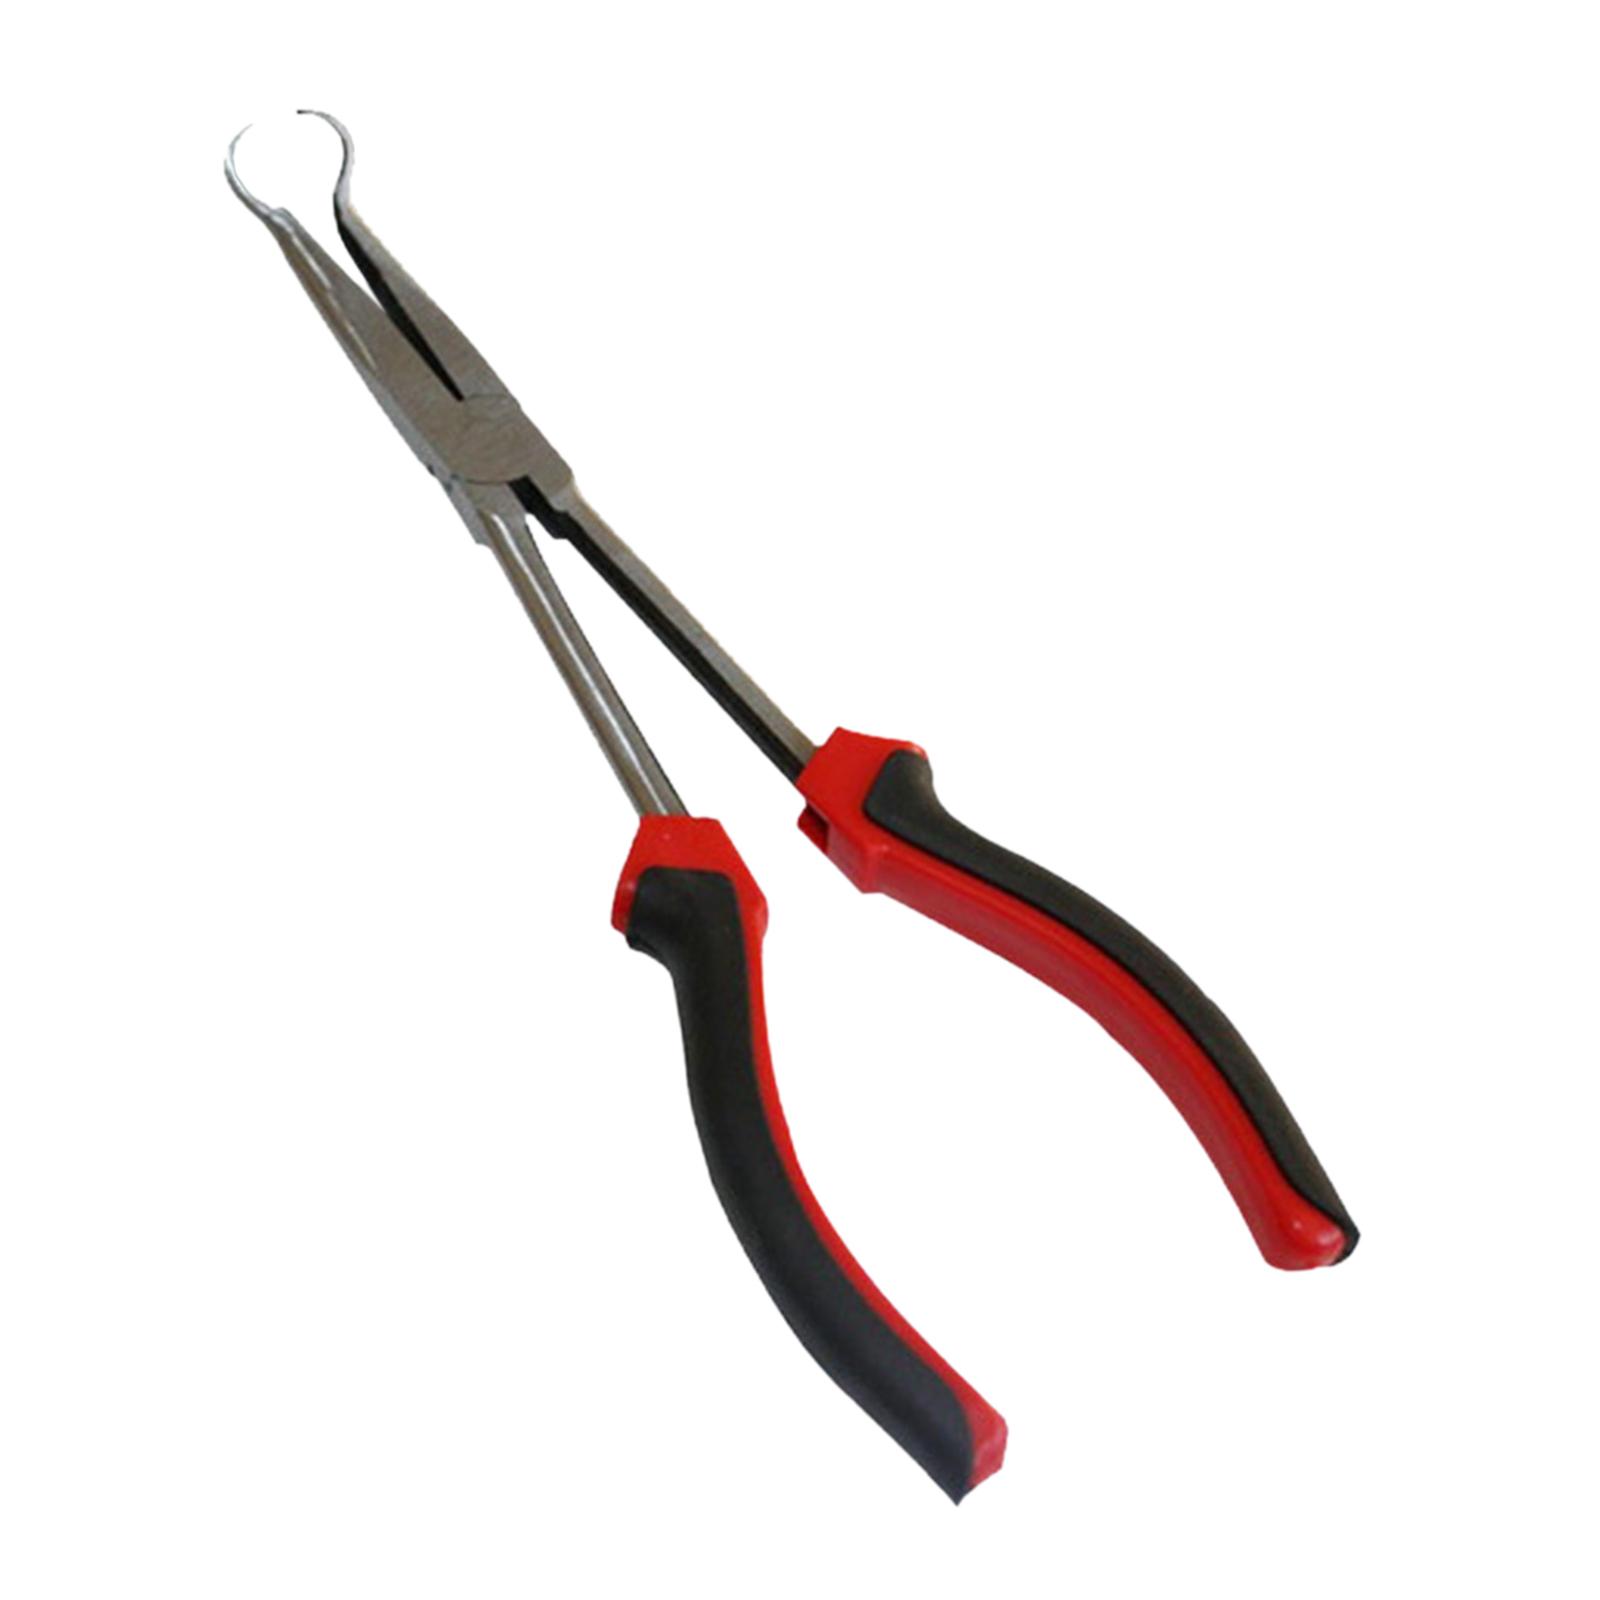 Spark Plug Wire Removal Pliers Tool Carbon Steel High Voltage Wire Clamp O Shaped Head